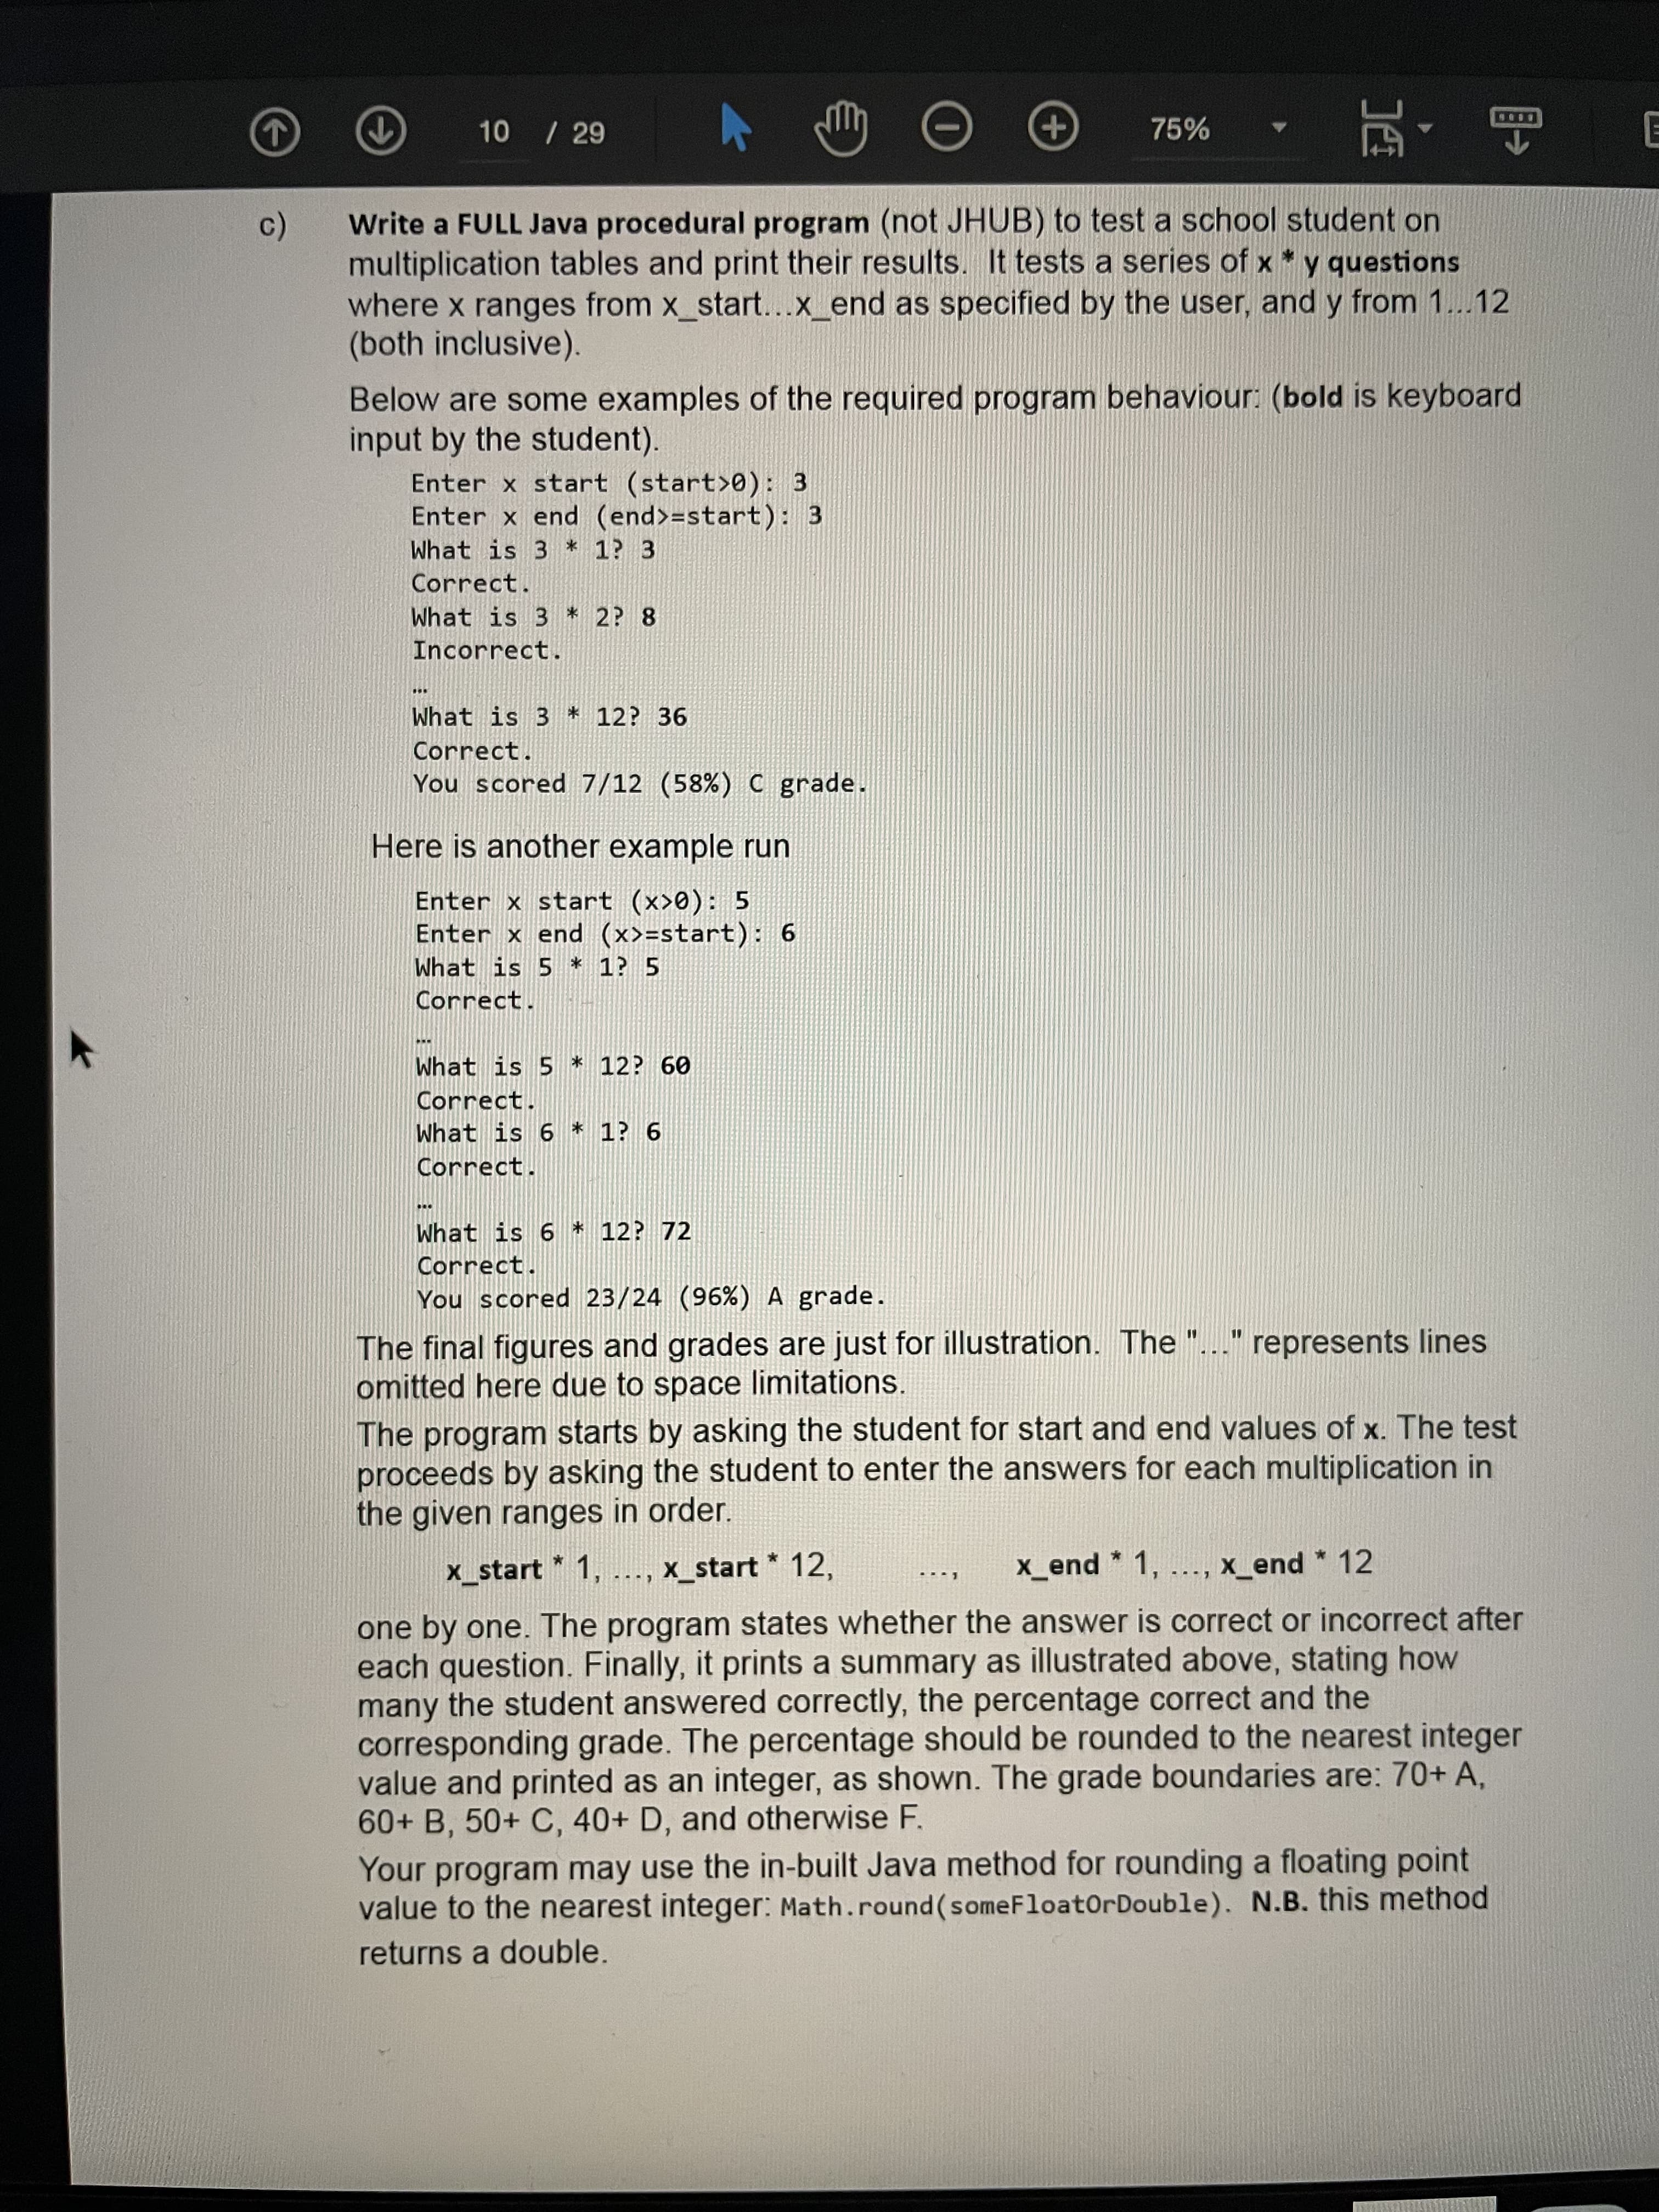 10 / 29
75%
Write a FULL Java procedural program (not JHUB) to test a school student on
multiplication tables and print their results. It tests a series of x * y questions
where x ranges from x_start...x_end as specified by the user, and y from 1...12
(both inclusive).
Below are some examples of the required program behaviour: (bold is keyboard
input by the student).
Enter x start (start>0): 3
Enter x end (end>=start): 3
What is 3 * 1? 3
Correct.
What is 3 * 2? 8
Incorrect.
...
What is 3 * 12? 36
Correct.
You scored 7/12 (58%) C grade.
Here is another example run
Enter x start (x>0): 5
Enter x end (x>=start): 6
What is 5 * 1? 5
Correct.
...
What is 5 * 12? 60
Correct.
What is 6 * 1? 6
Correct.
...
What is 6 * 12? 72
Correct.
You scored 23/24 (96%) A grade.
The final figures and grades are just for illustration. The "..." represents lines
omitted here due to space limitations.
The program starts by asking the student for start and end values of x. The test
proceeds by asking the student to enter the answers for each multiplication in
the given ranges in order.
x_start * 1, ..., x_start * 12,
x_end * 1,
x_end * 12
one by one. The program states whether the answer is correct or incorrect after
each question. Finally, it prints a summary as illustrated above, stating how
many the student answered correctly, the percentage correct and the
corresponding grade. The percentage should be rounded to the nearest integer
value and printed as an integer, as shown. The grade boundaries are: 70+ A,
60+ B, 50+ C, 40+ D, and otherwise F.
Your program may use the in-built Java method for rounding a floating point
value to the nearest integer: Math.round (someFloatOrDouble). N.B. this method
returns a double.
